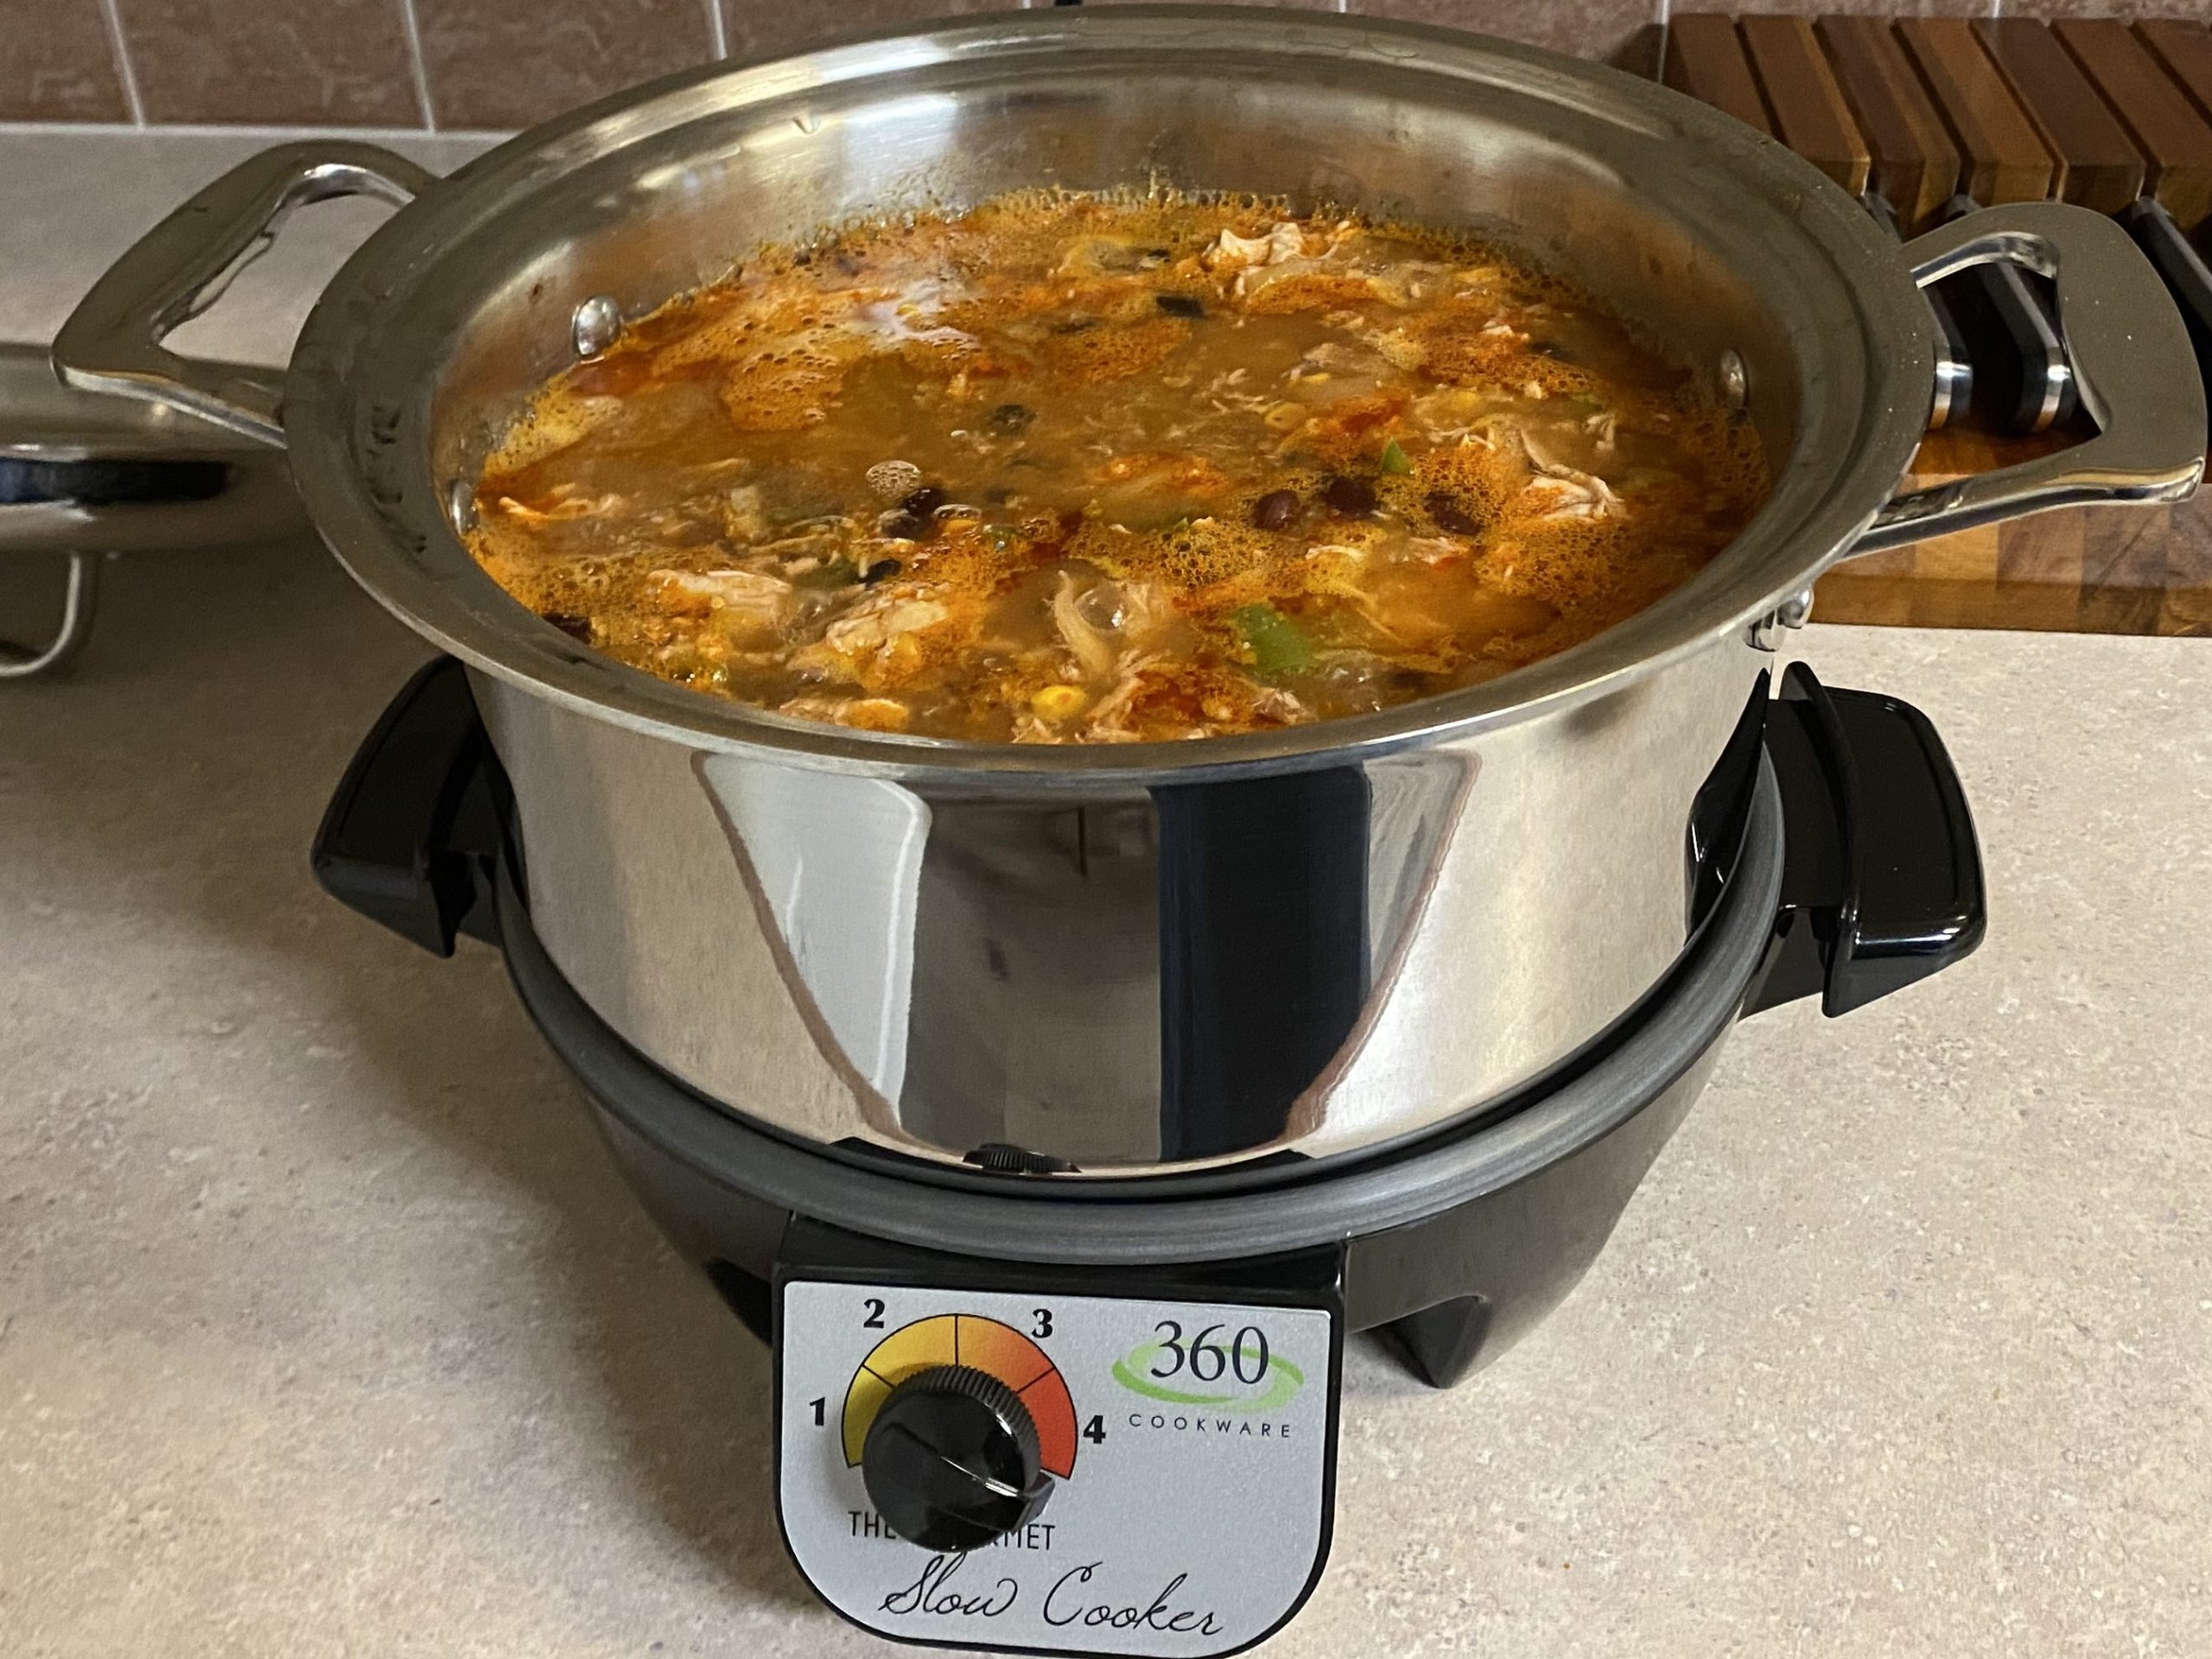 360 Cookware Slow Cooker review on base